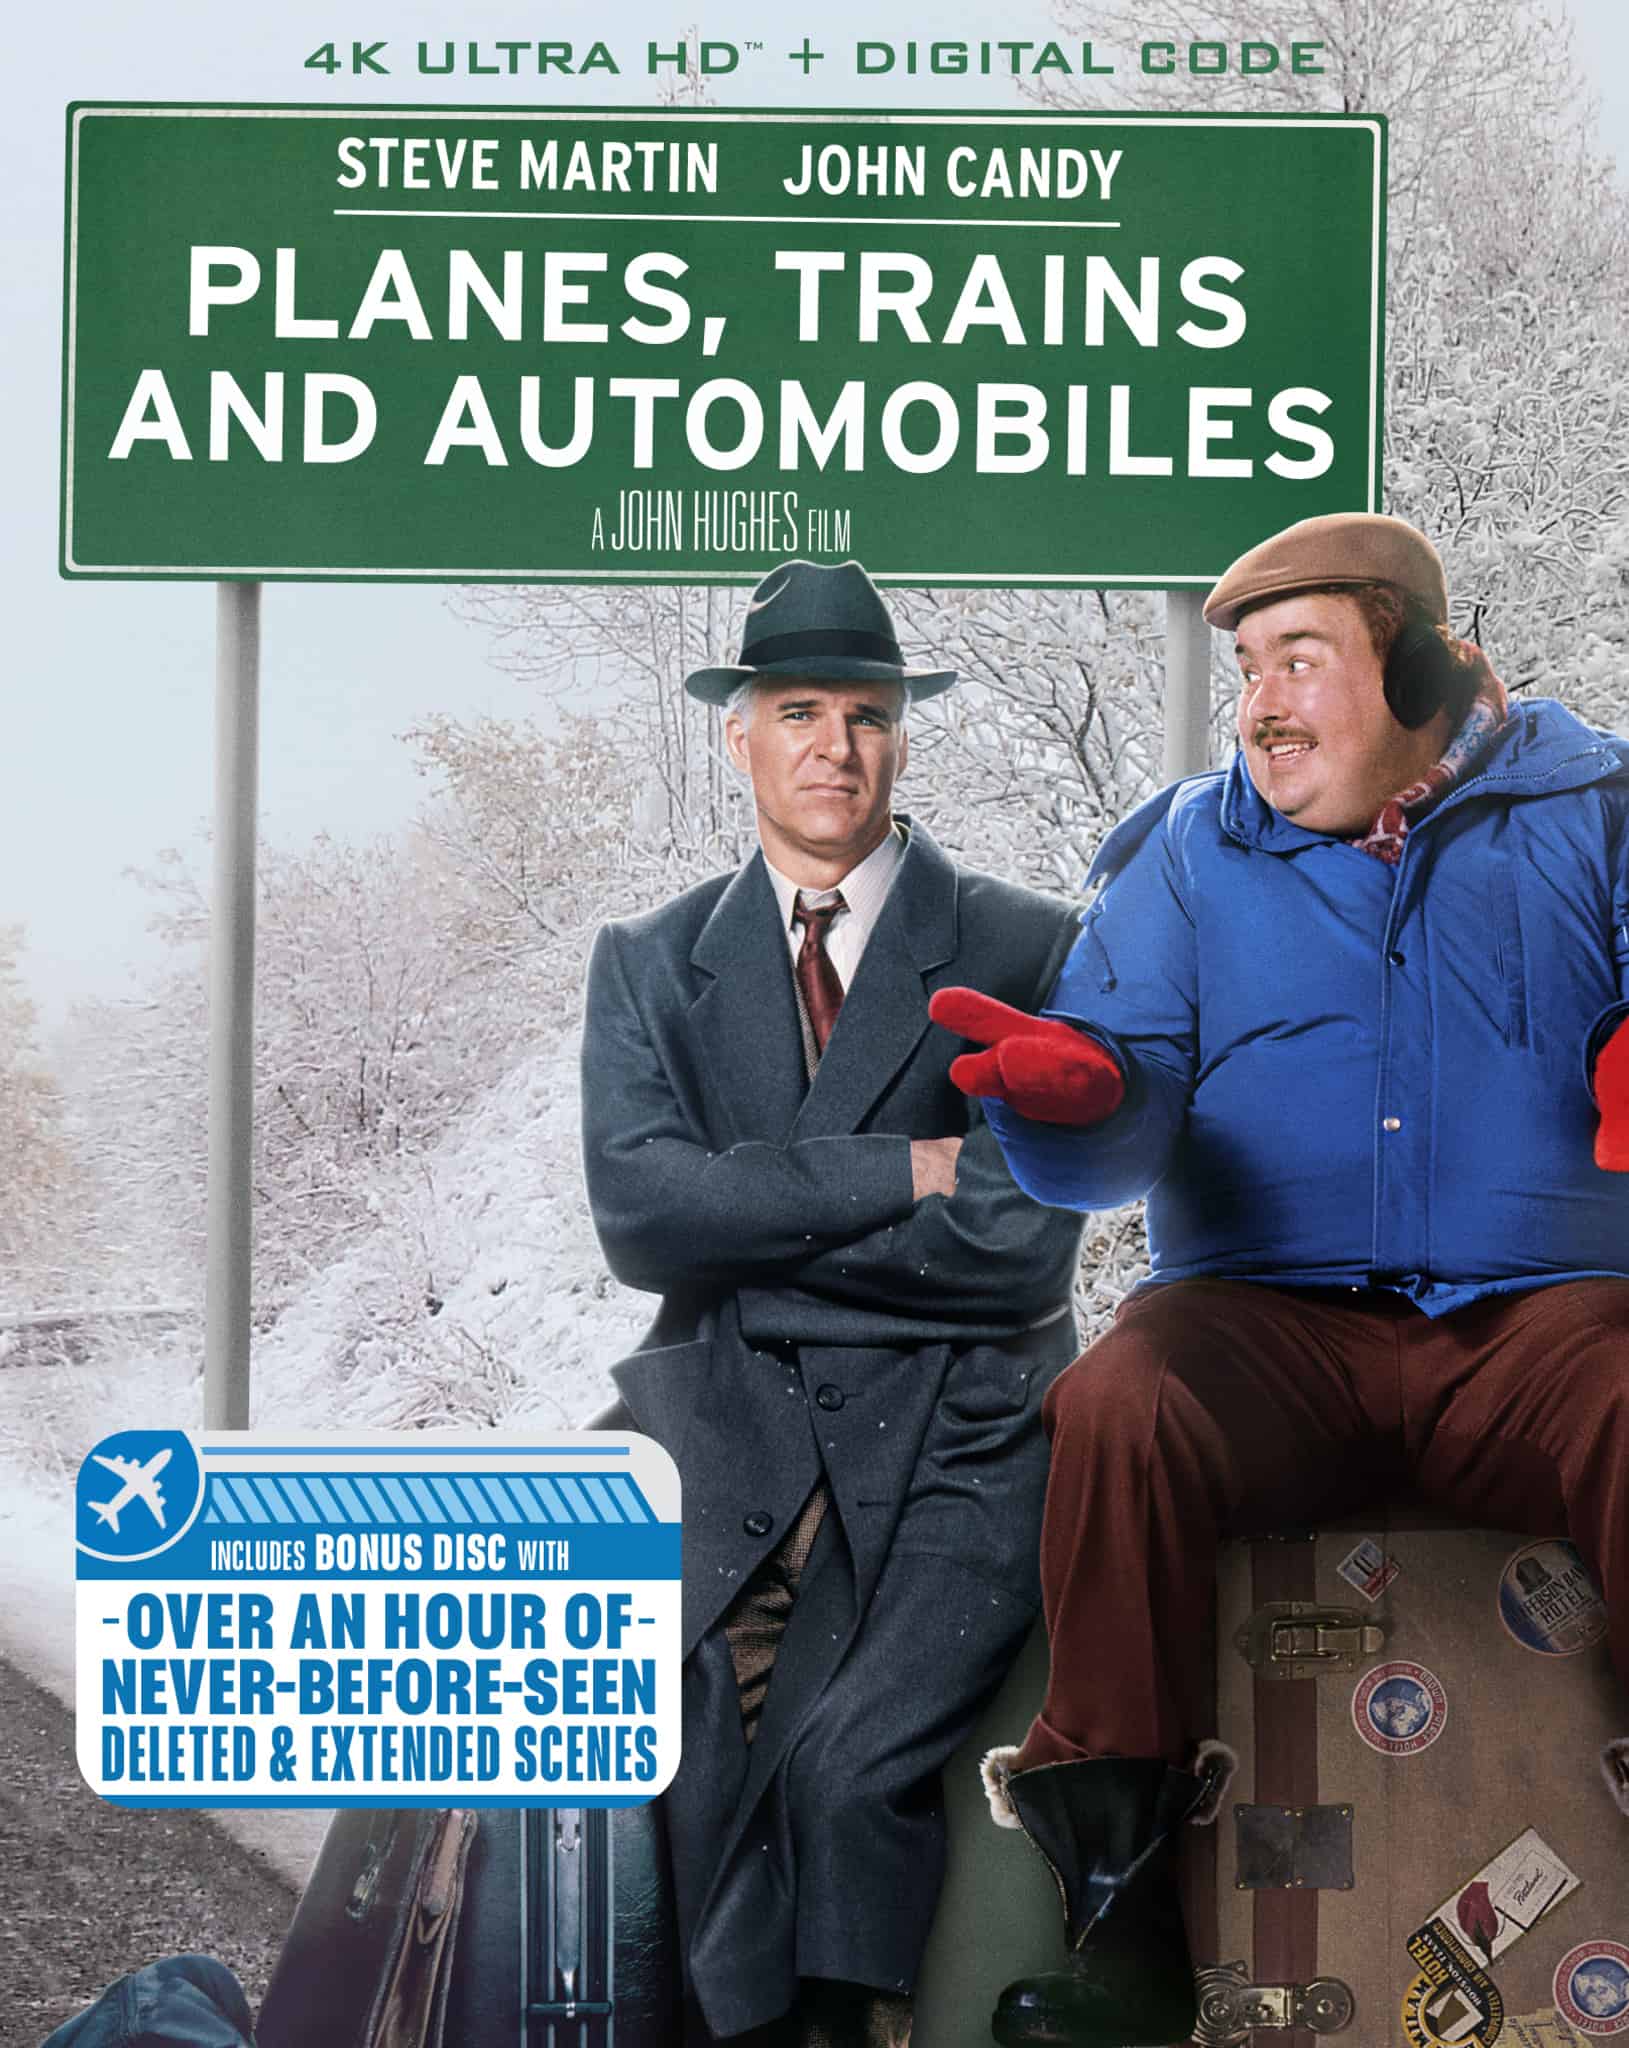 Planes Trains and Automobiles debuts on 4K UHD with an hour of unseen footage 2